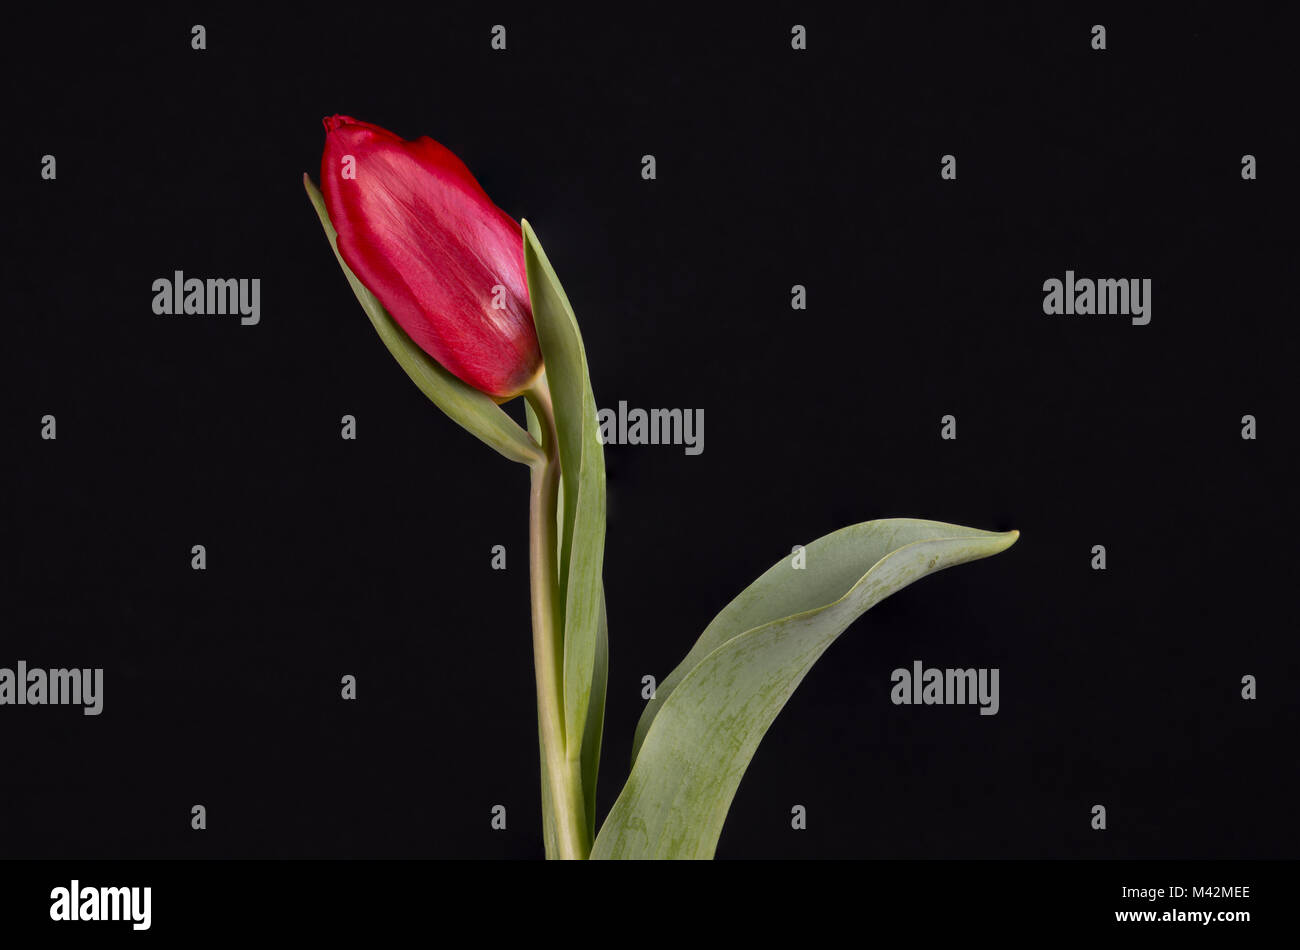 An image of a red tulip against a black background Stock Photo